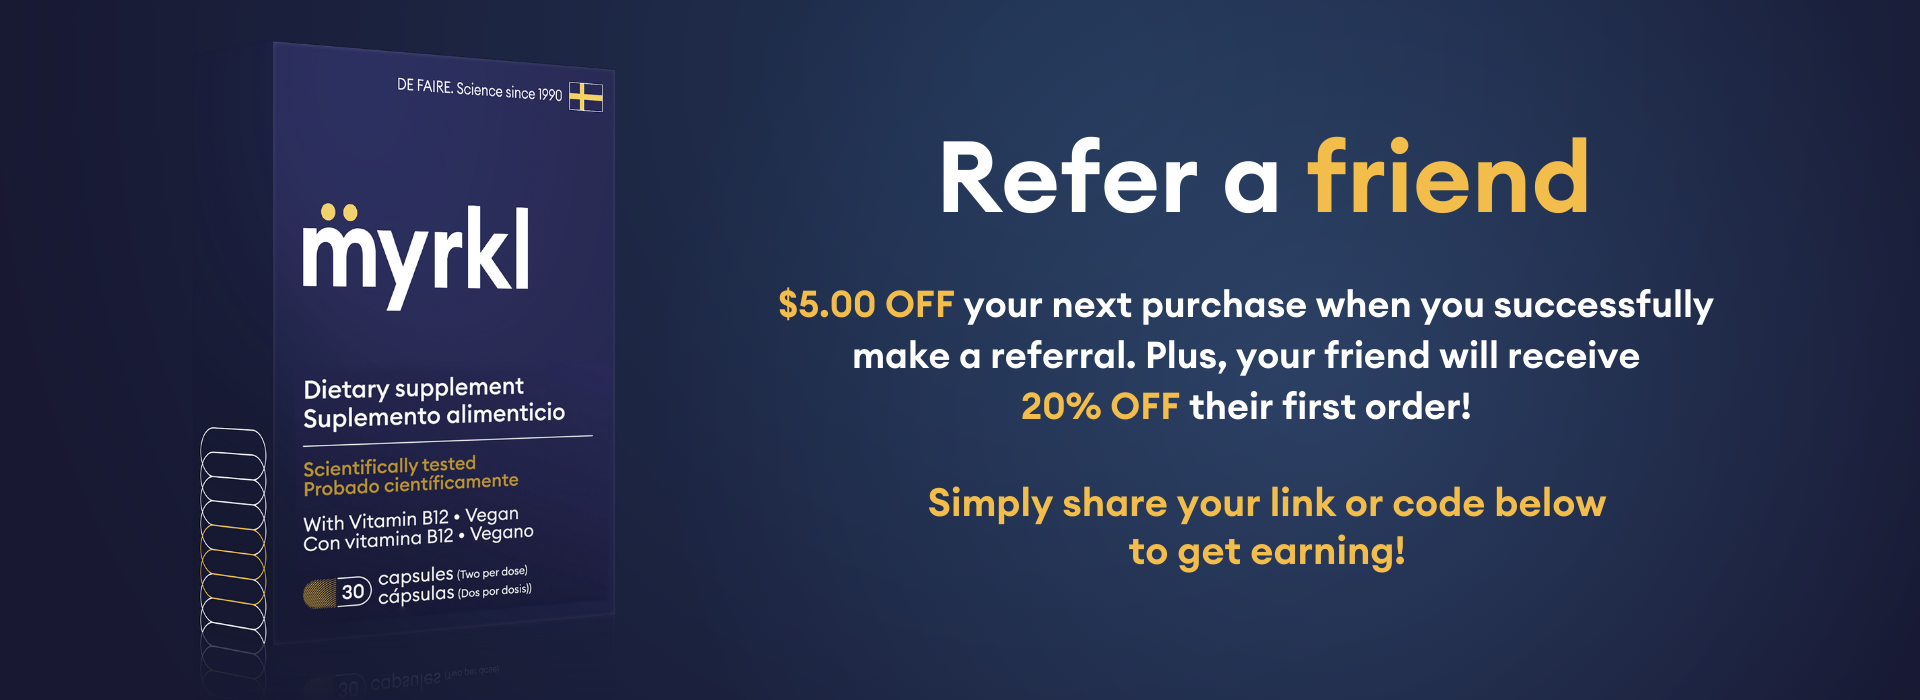 refer a friend. $5 off your next purchase when you successfully make a referral. Plus, your friend will receive 20% off their first order! simply share your link or code below to get earning.